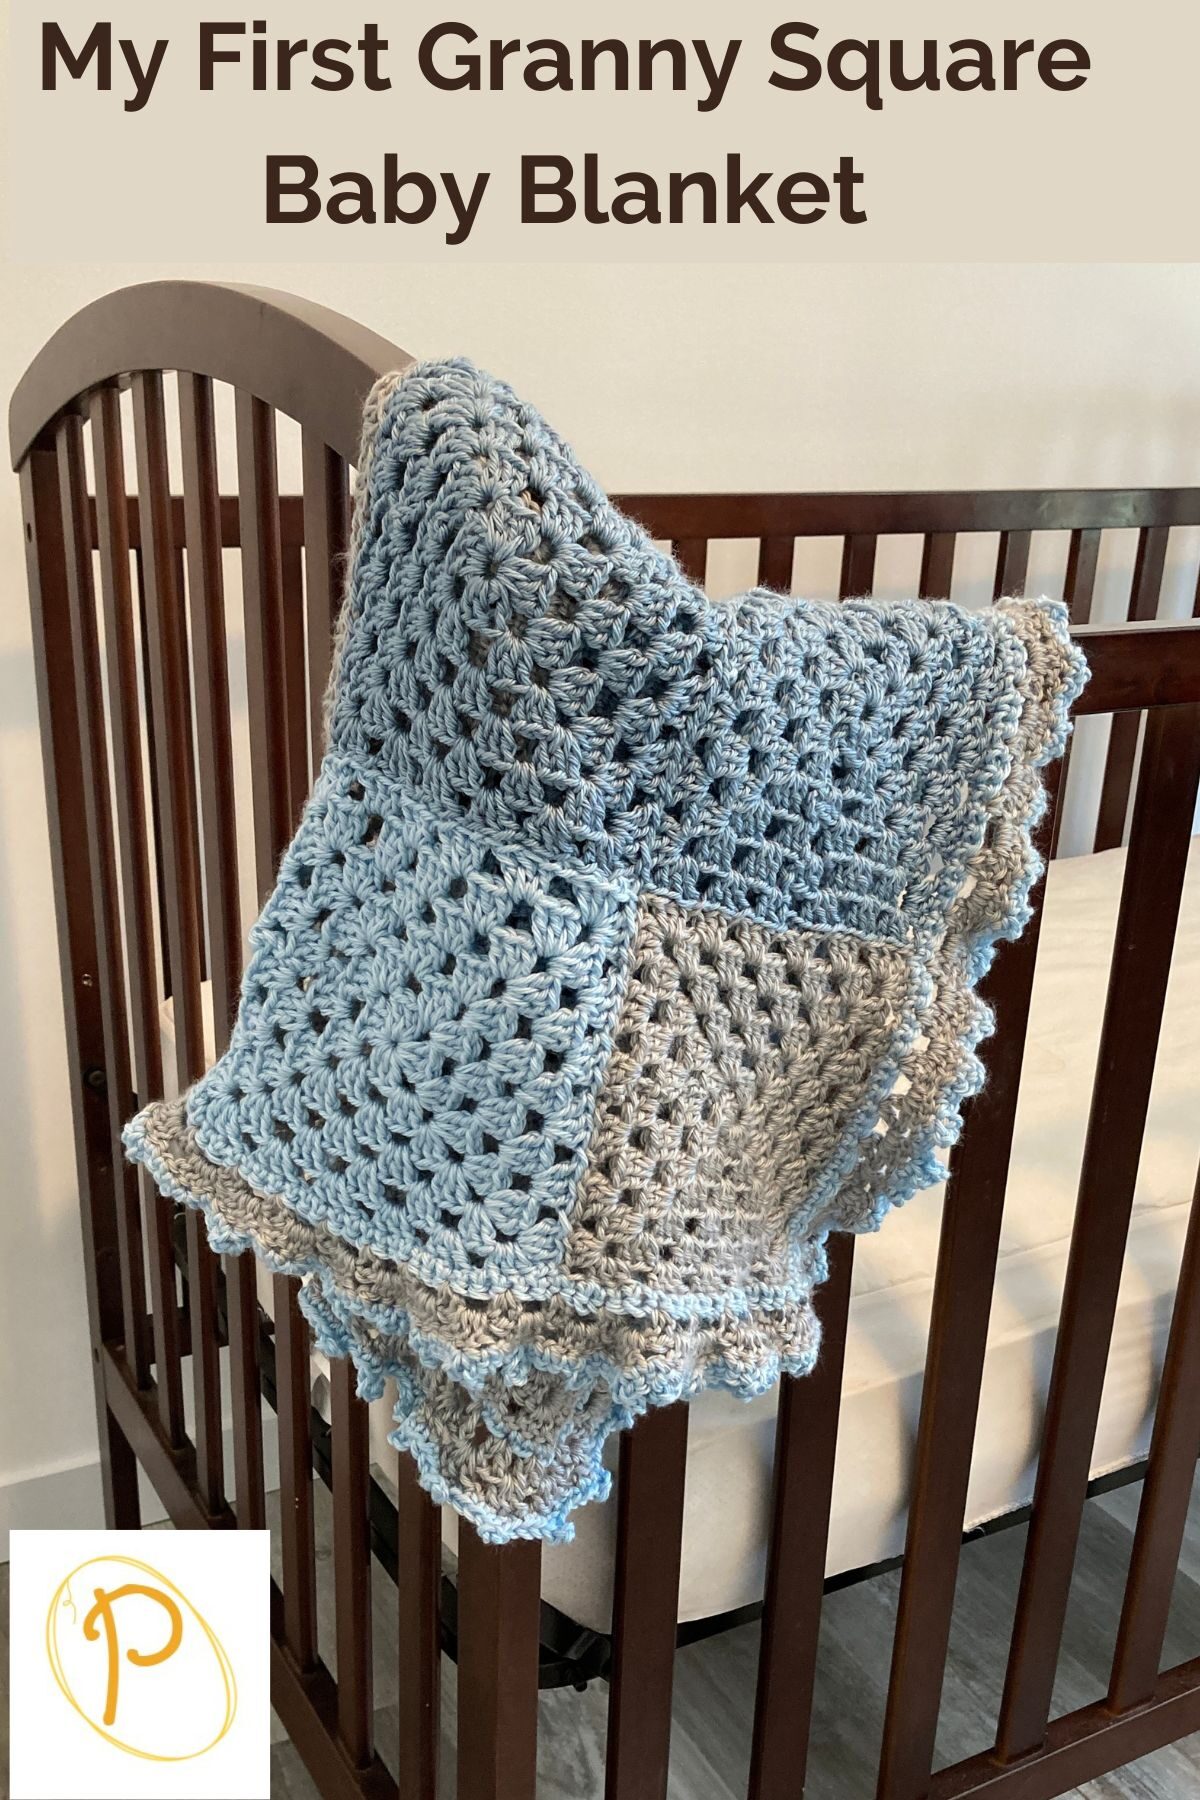 My First Granny Square Baby Blanket